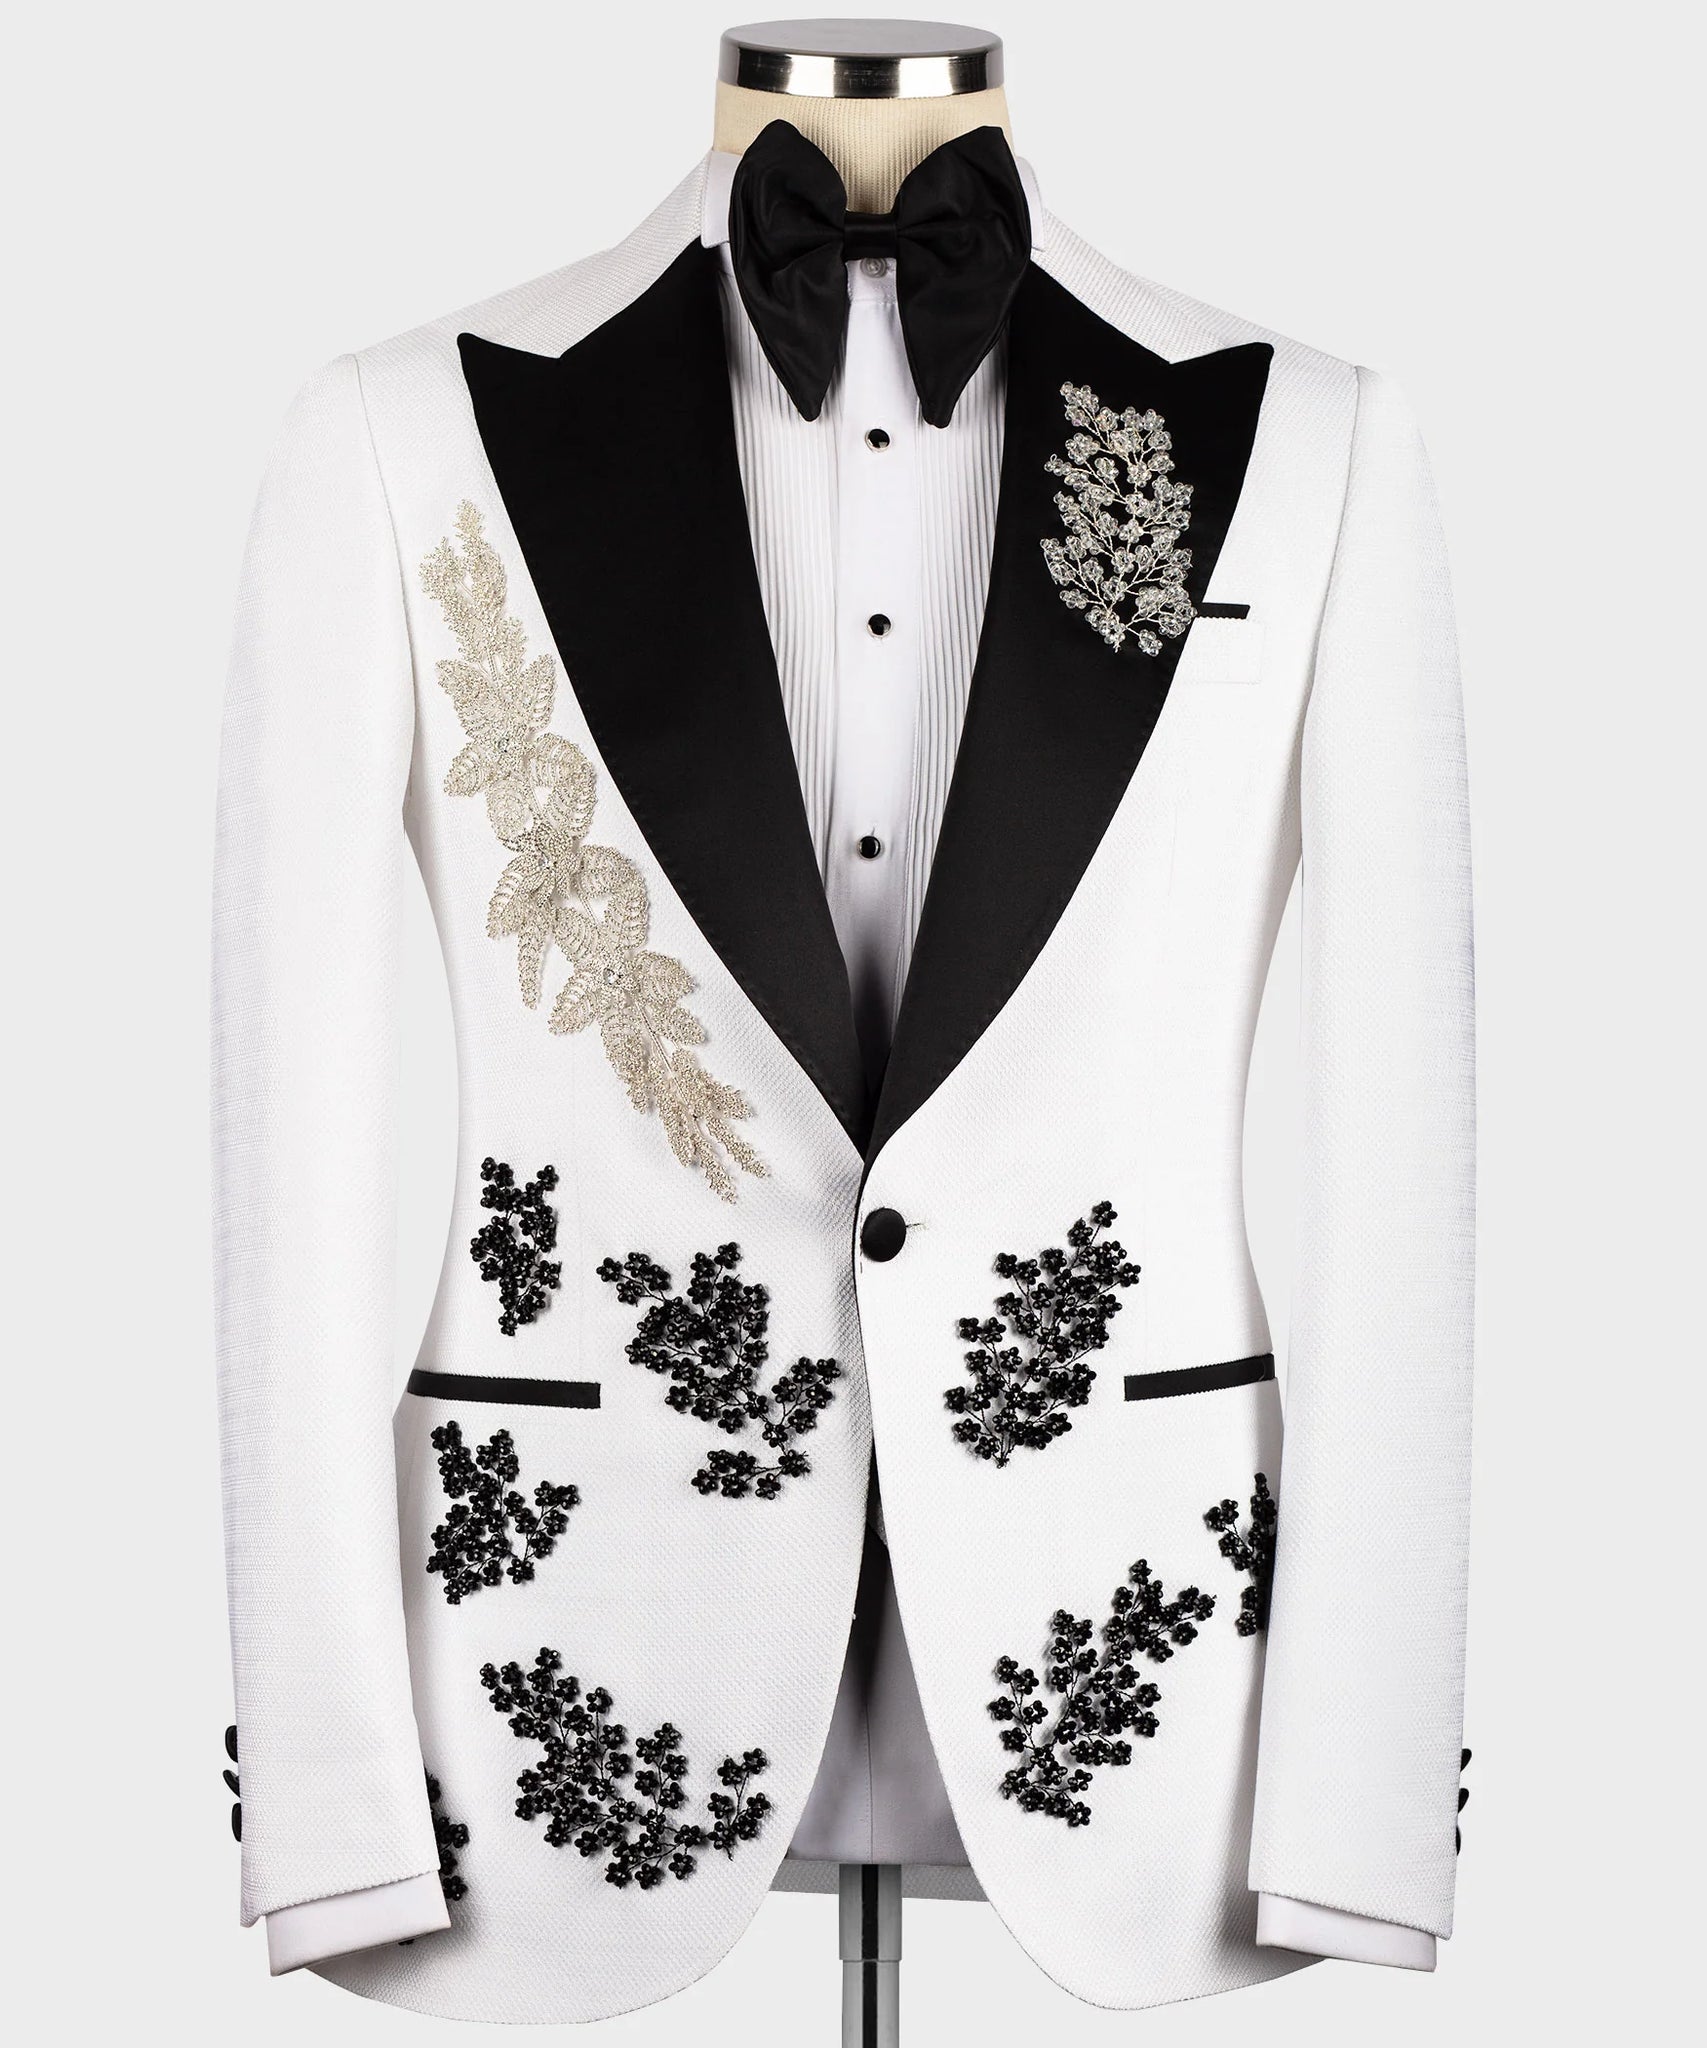 GOLD,BLACK FLORAL THEMED SPECIAL TUXEDO